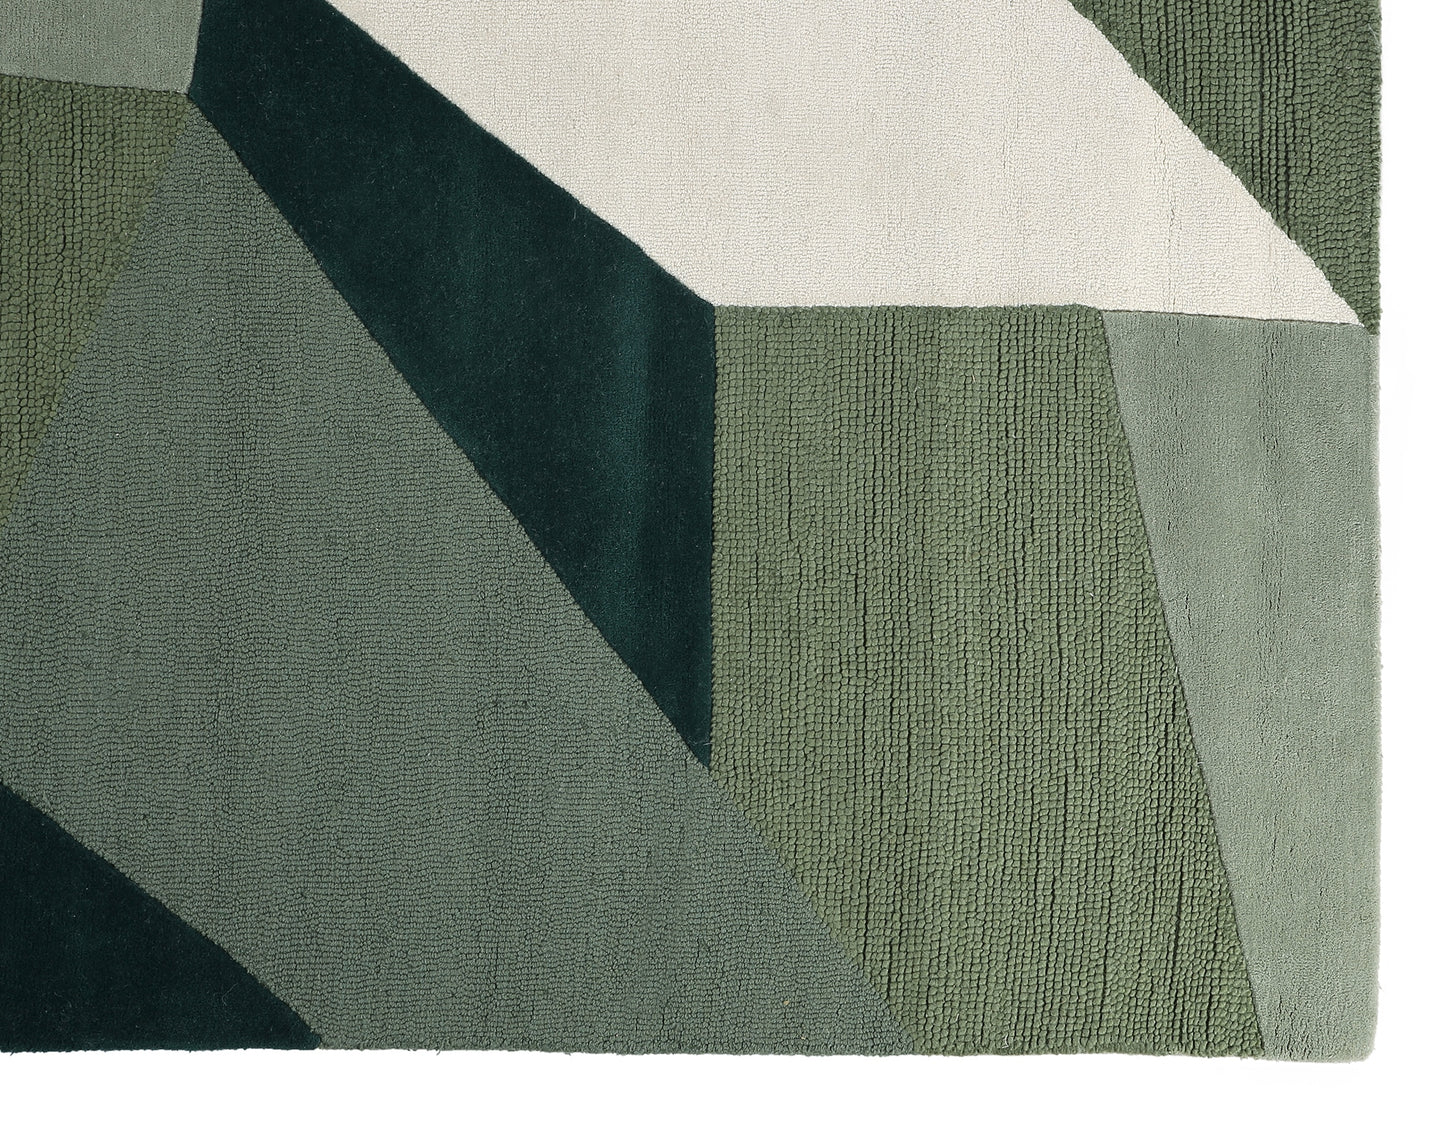 Olive Green Grey and Natural Hand Tufted Wool Rug - 5'x8'